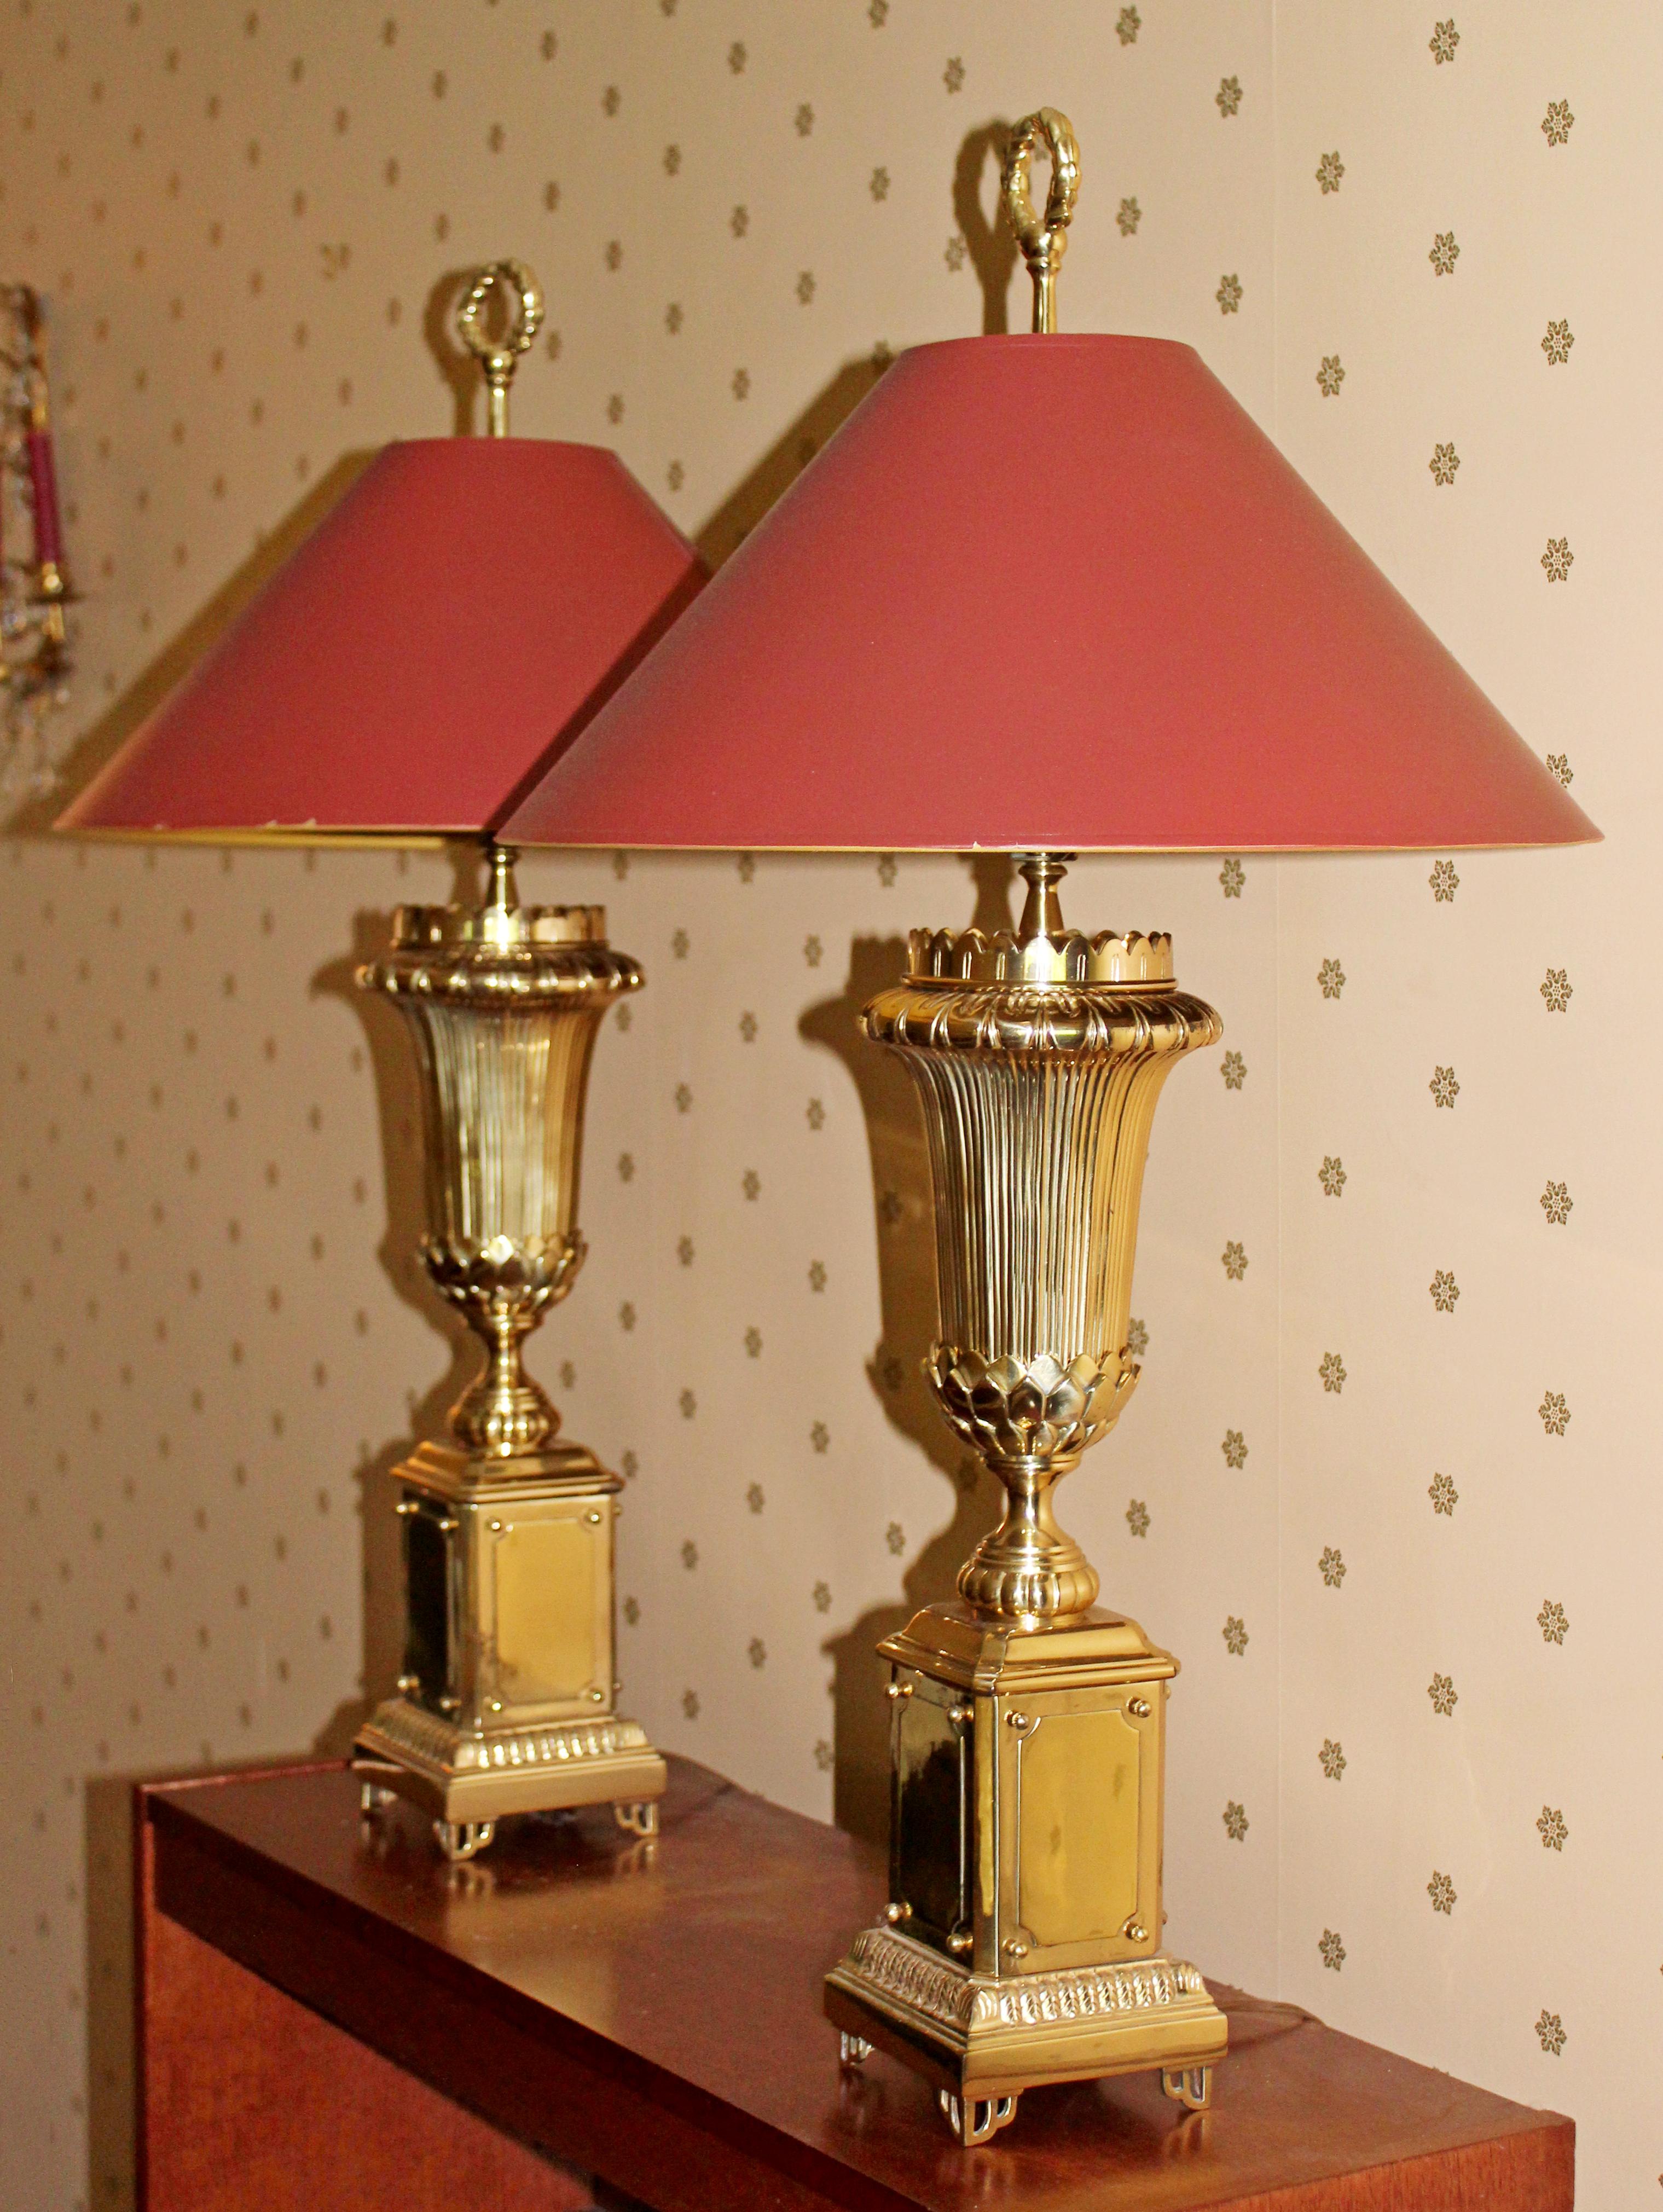 For your consideration is a wonderful pair of chapman brass table lamps with original unique finials. In very good condition. The dimensions of the lamps are 6